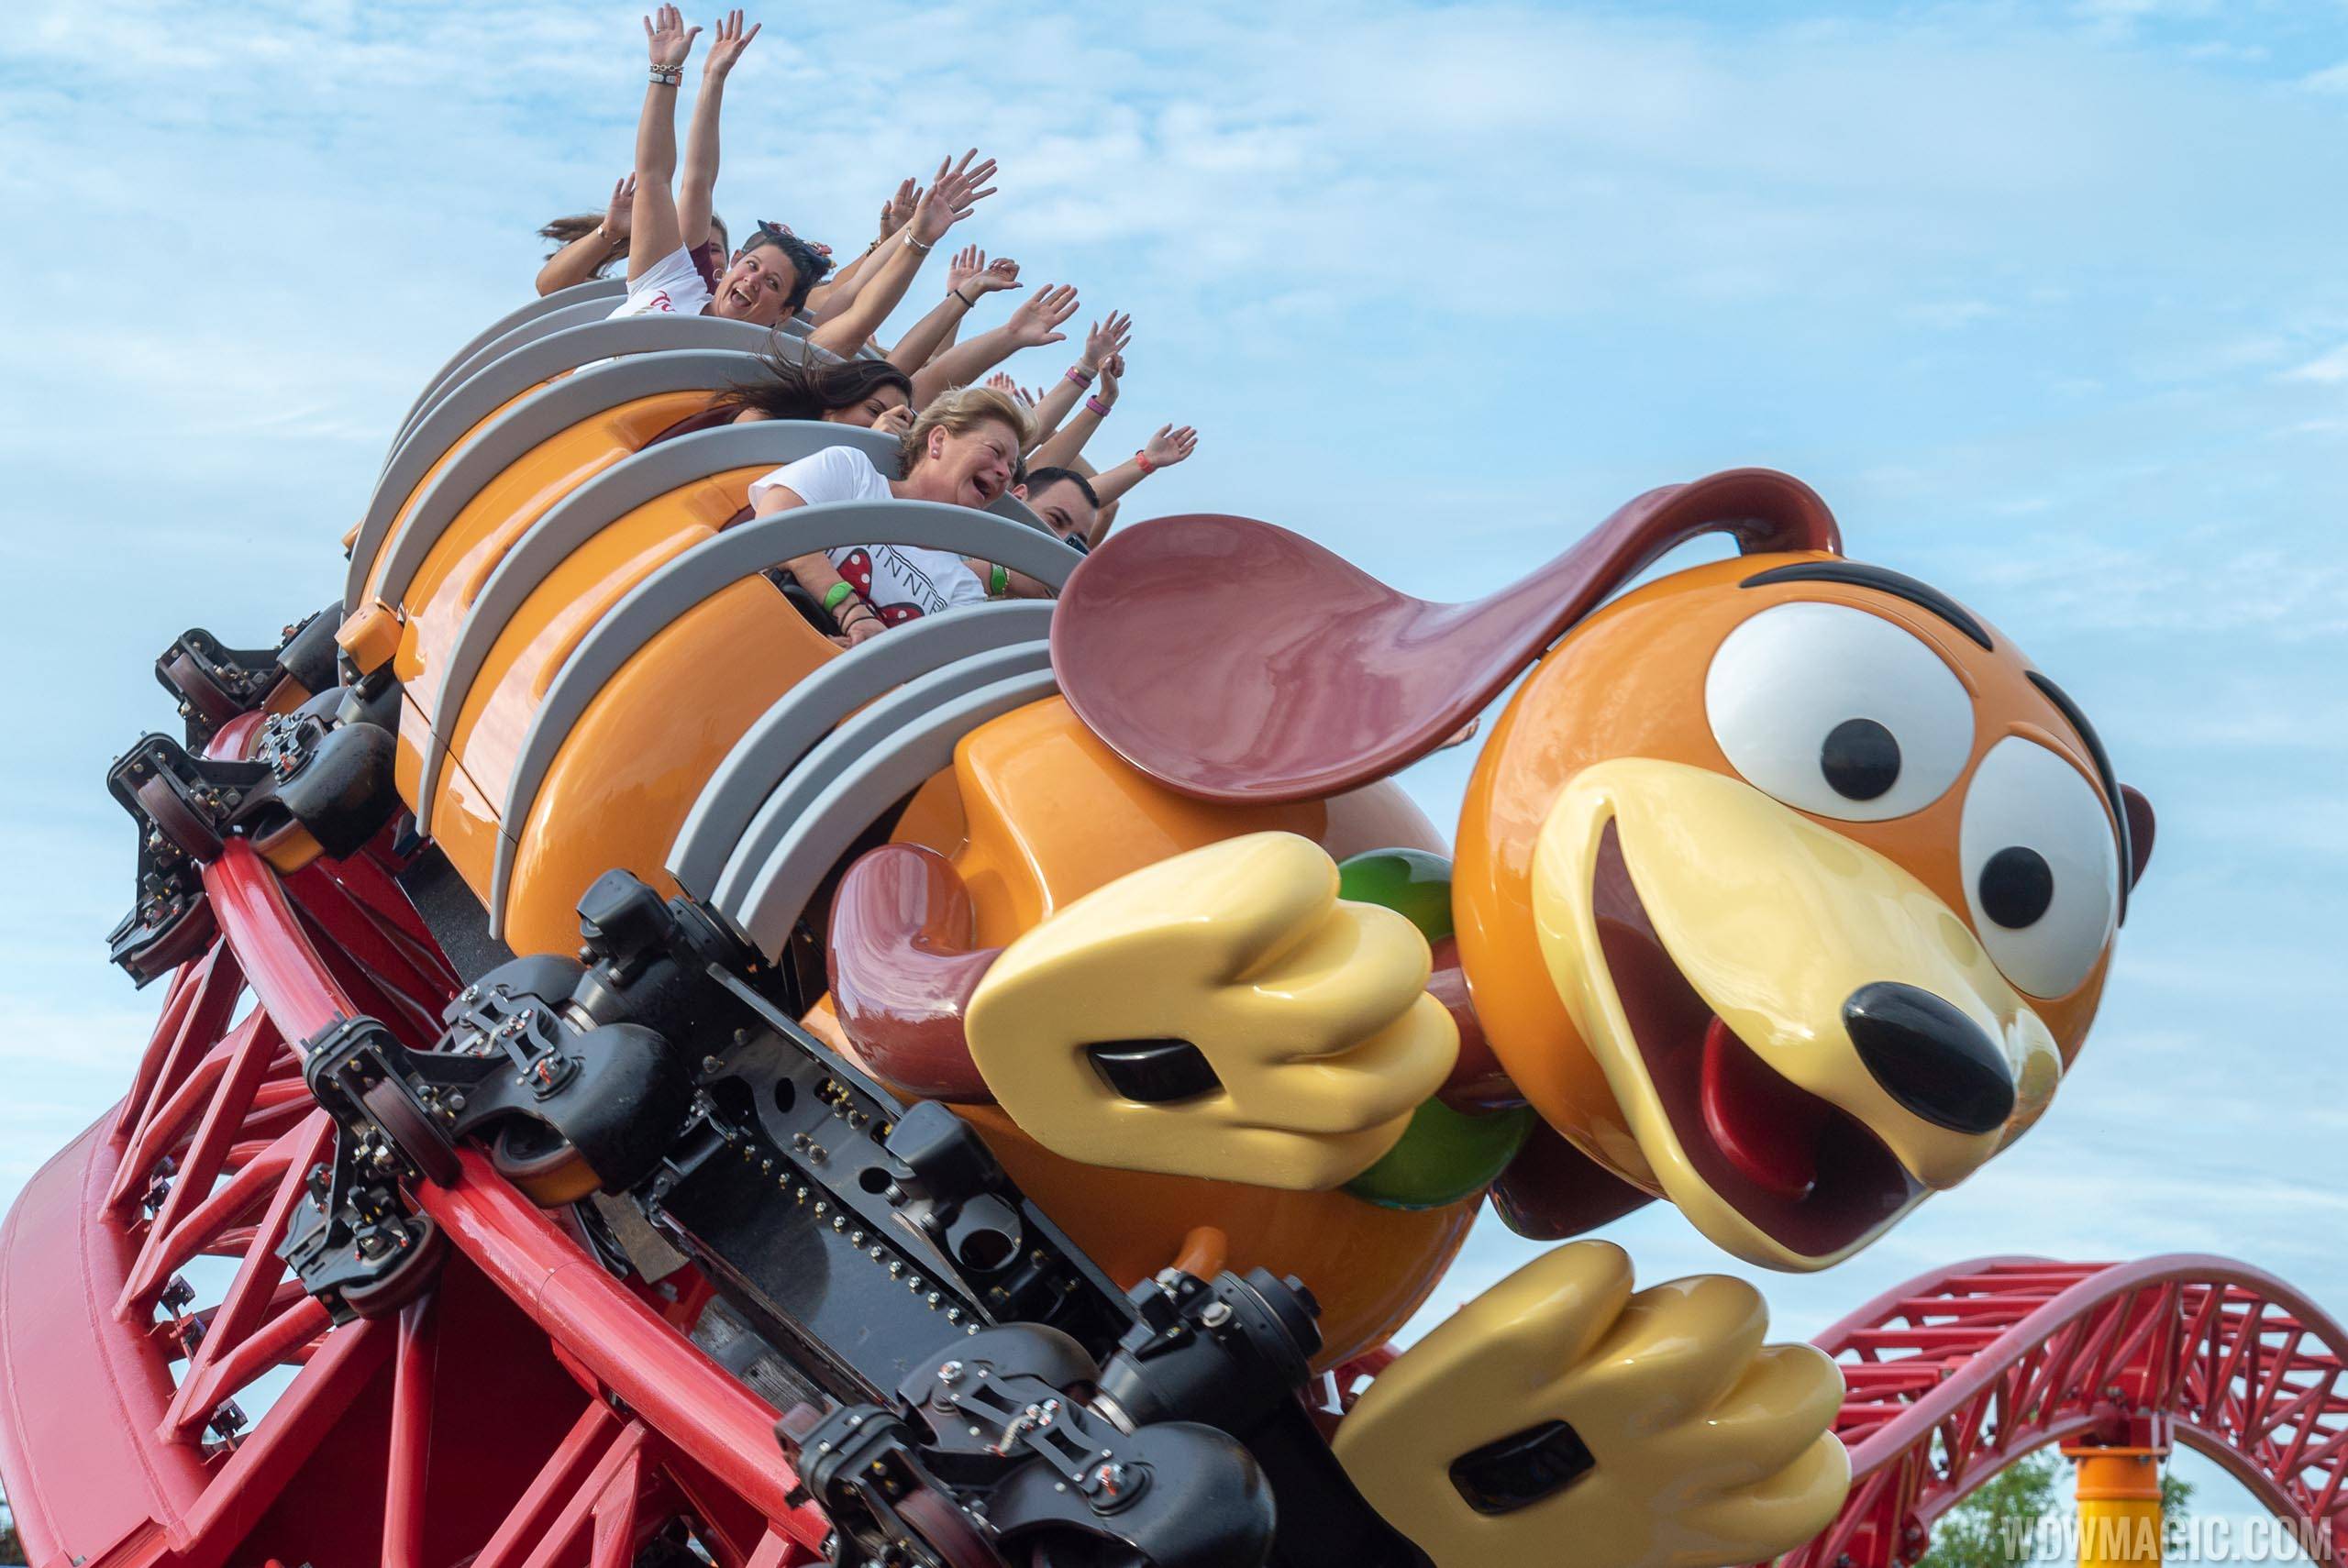 Slinky Dog Dash is part of Disney After Hours at the Studios